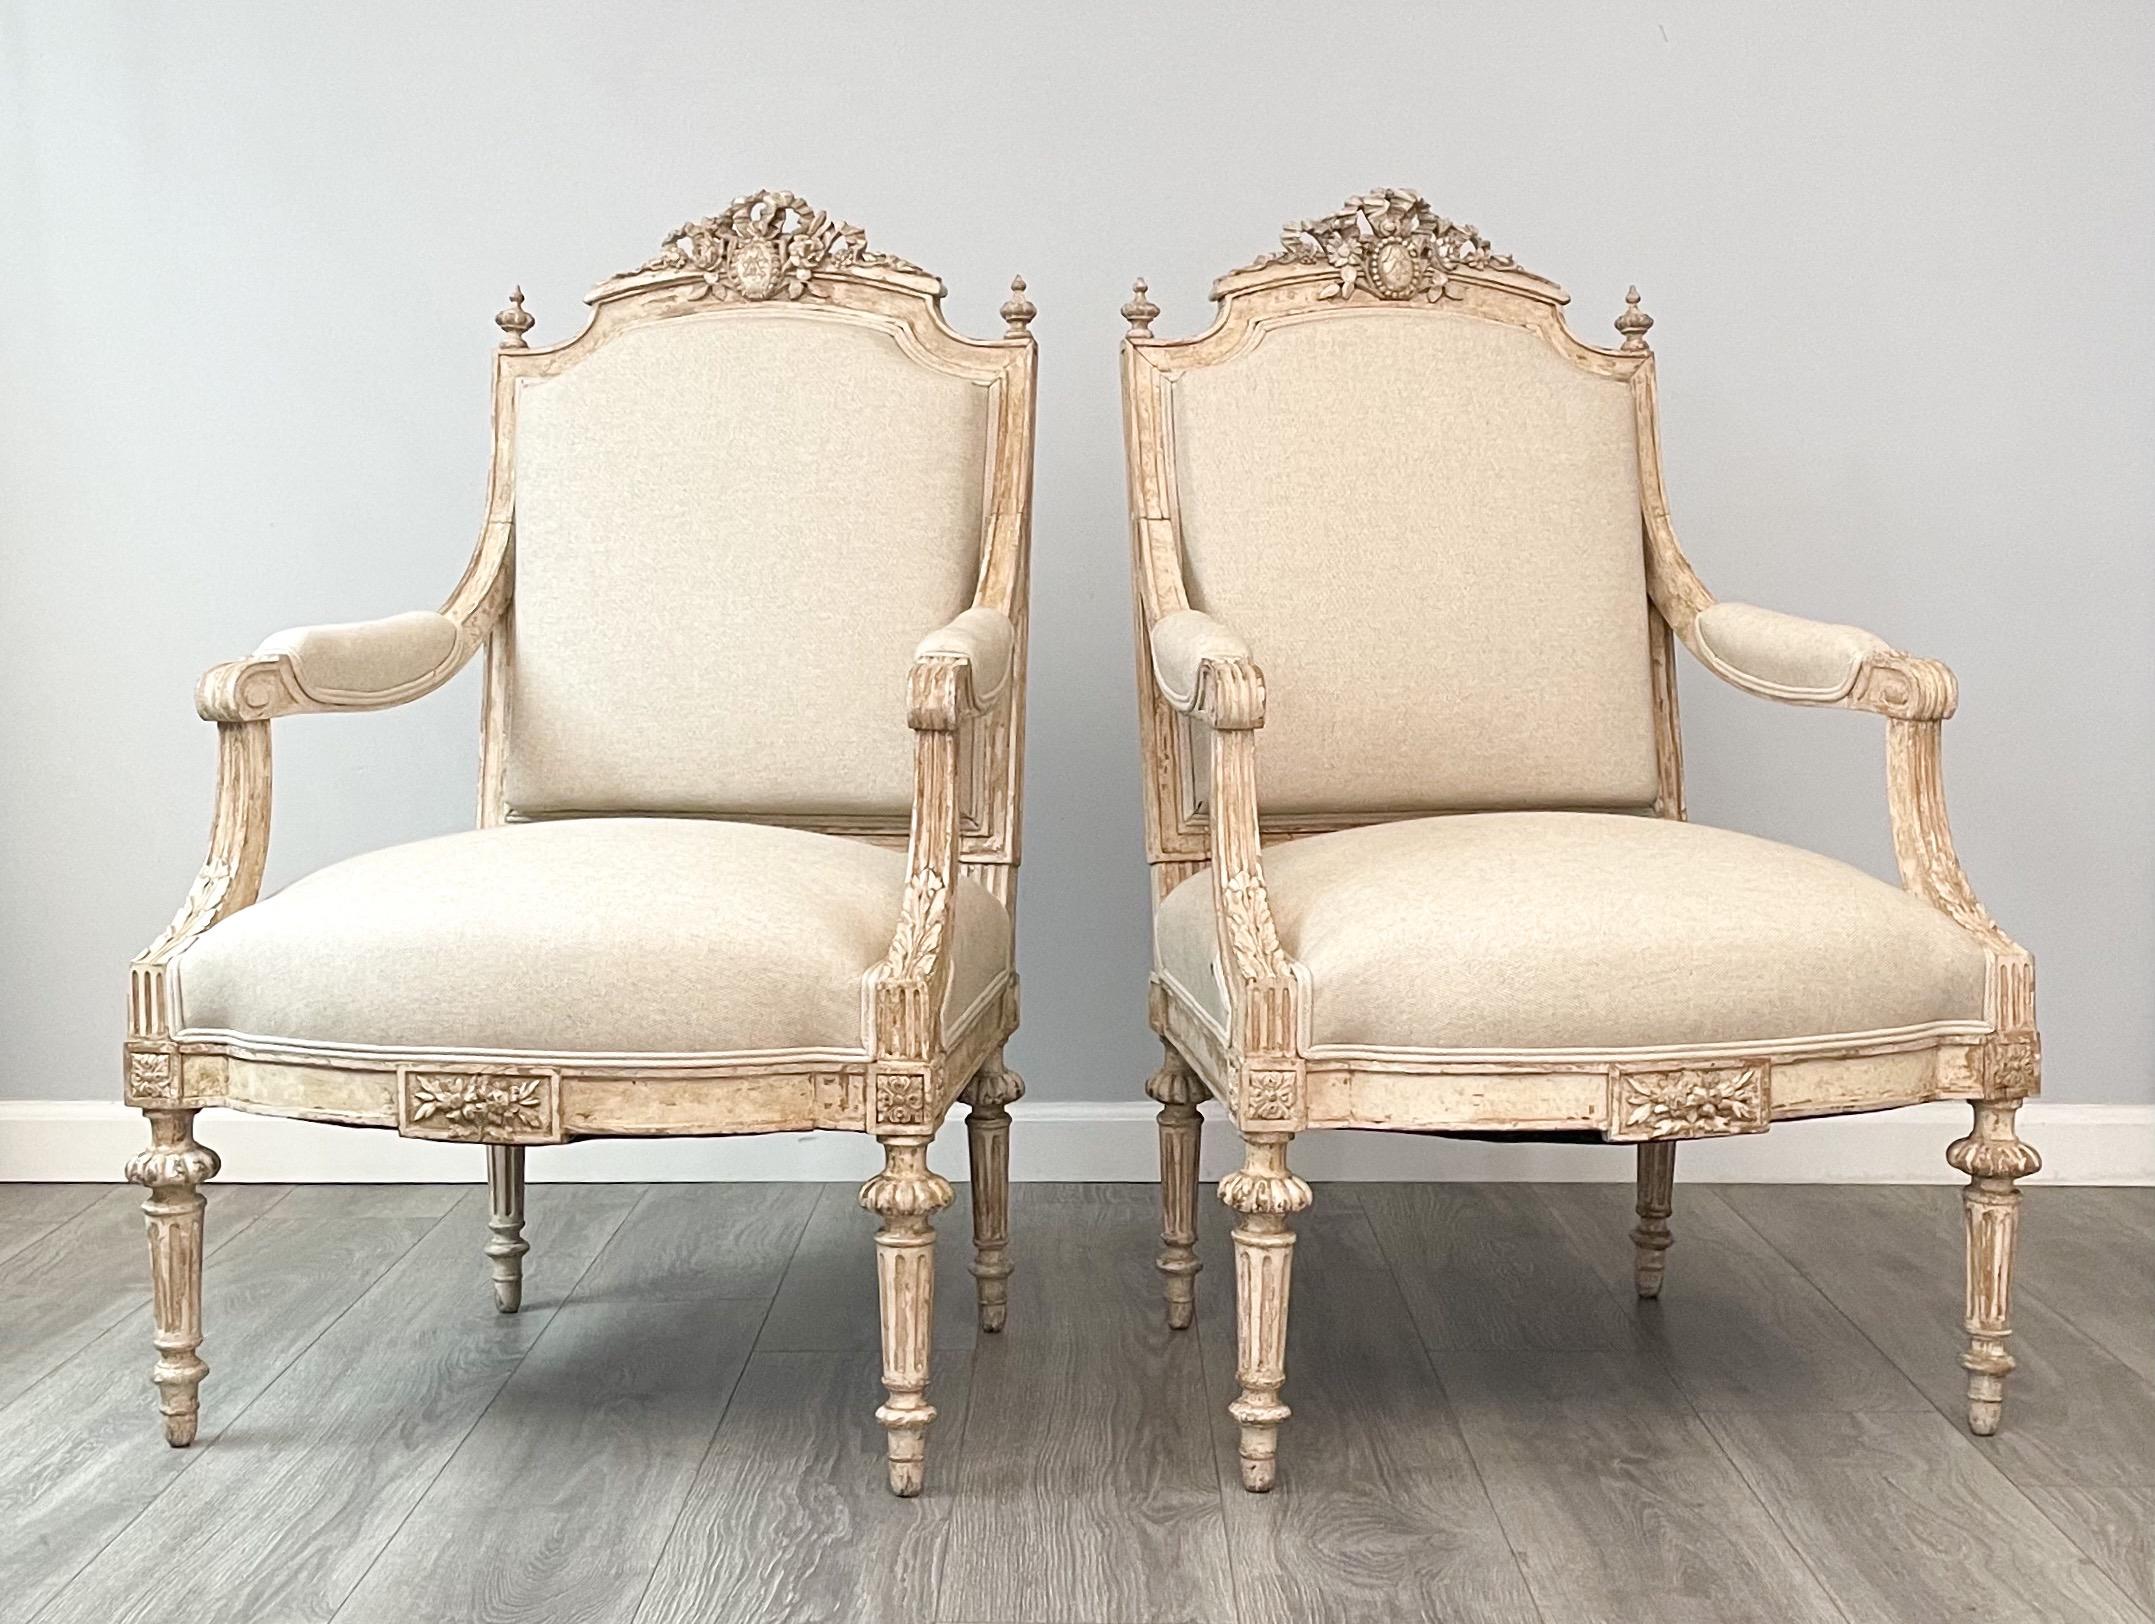 Fine pair of 1920s French arm chairs in the neoclassical style.

The chairs feature beautifully carved wood frames, a naturally distressed paint finish and new cotton linen canvas upholstery.

A very elegant pair of chairs which can be